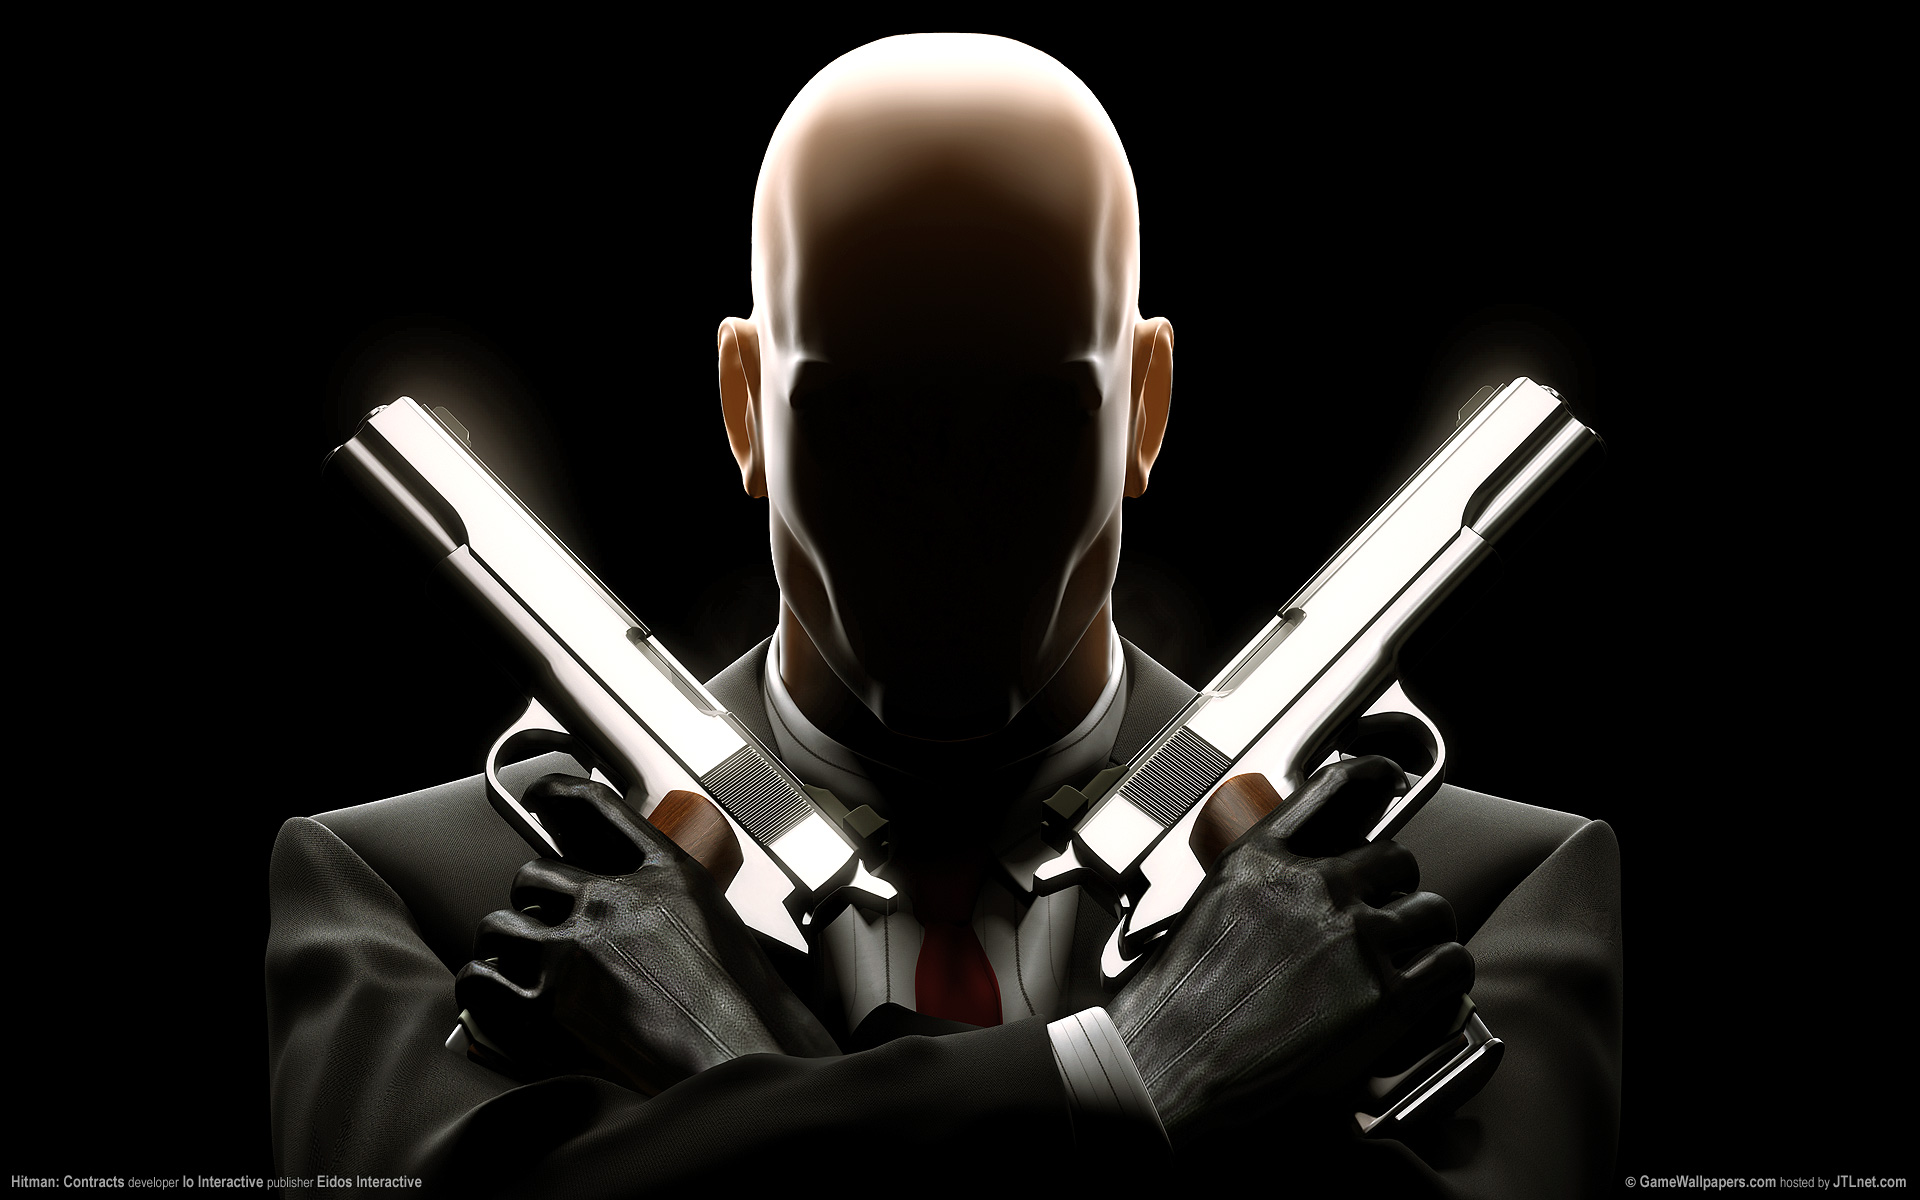 http://www.sopapeldeparede.com.br/wp-content/uploads/2009/11/hitman-contracts-01-games-widescreen-wallpapers.jpg